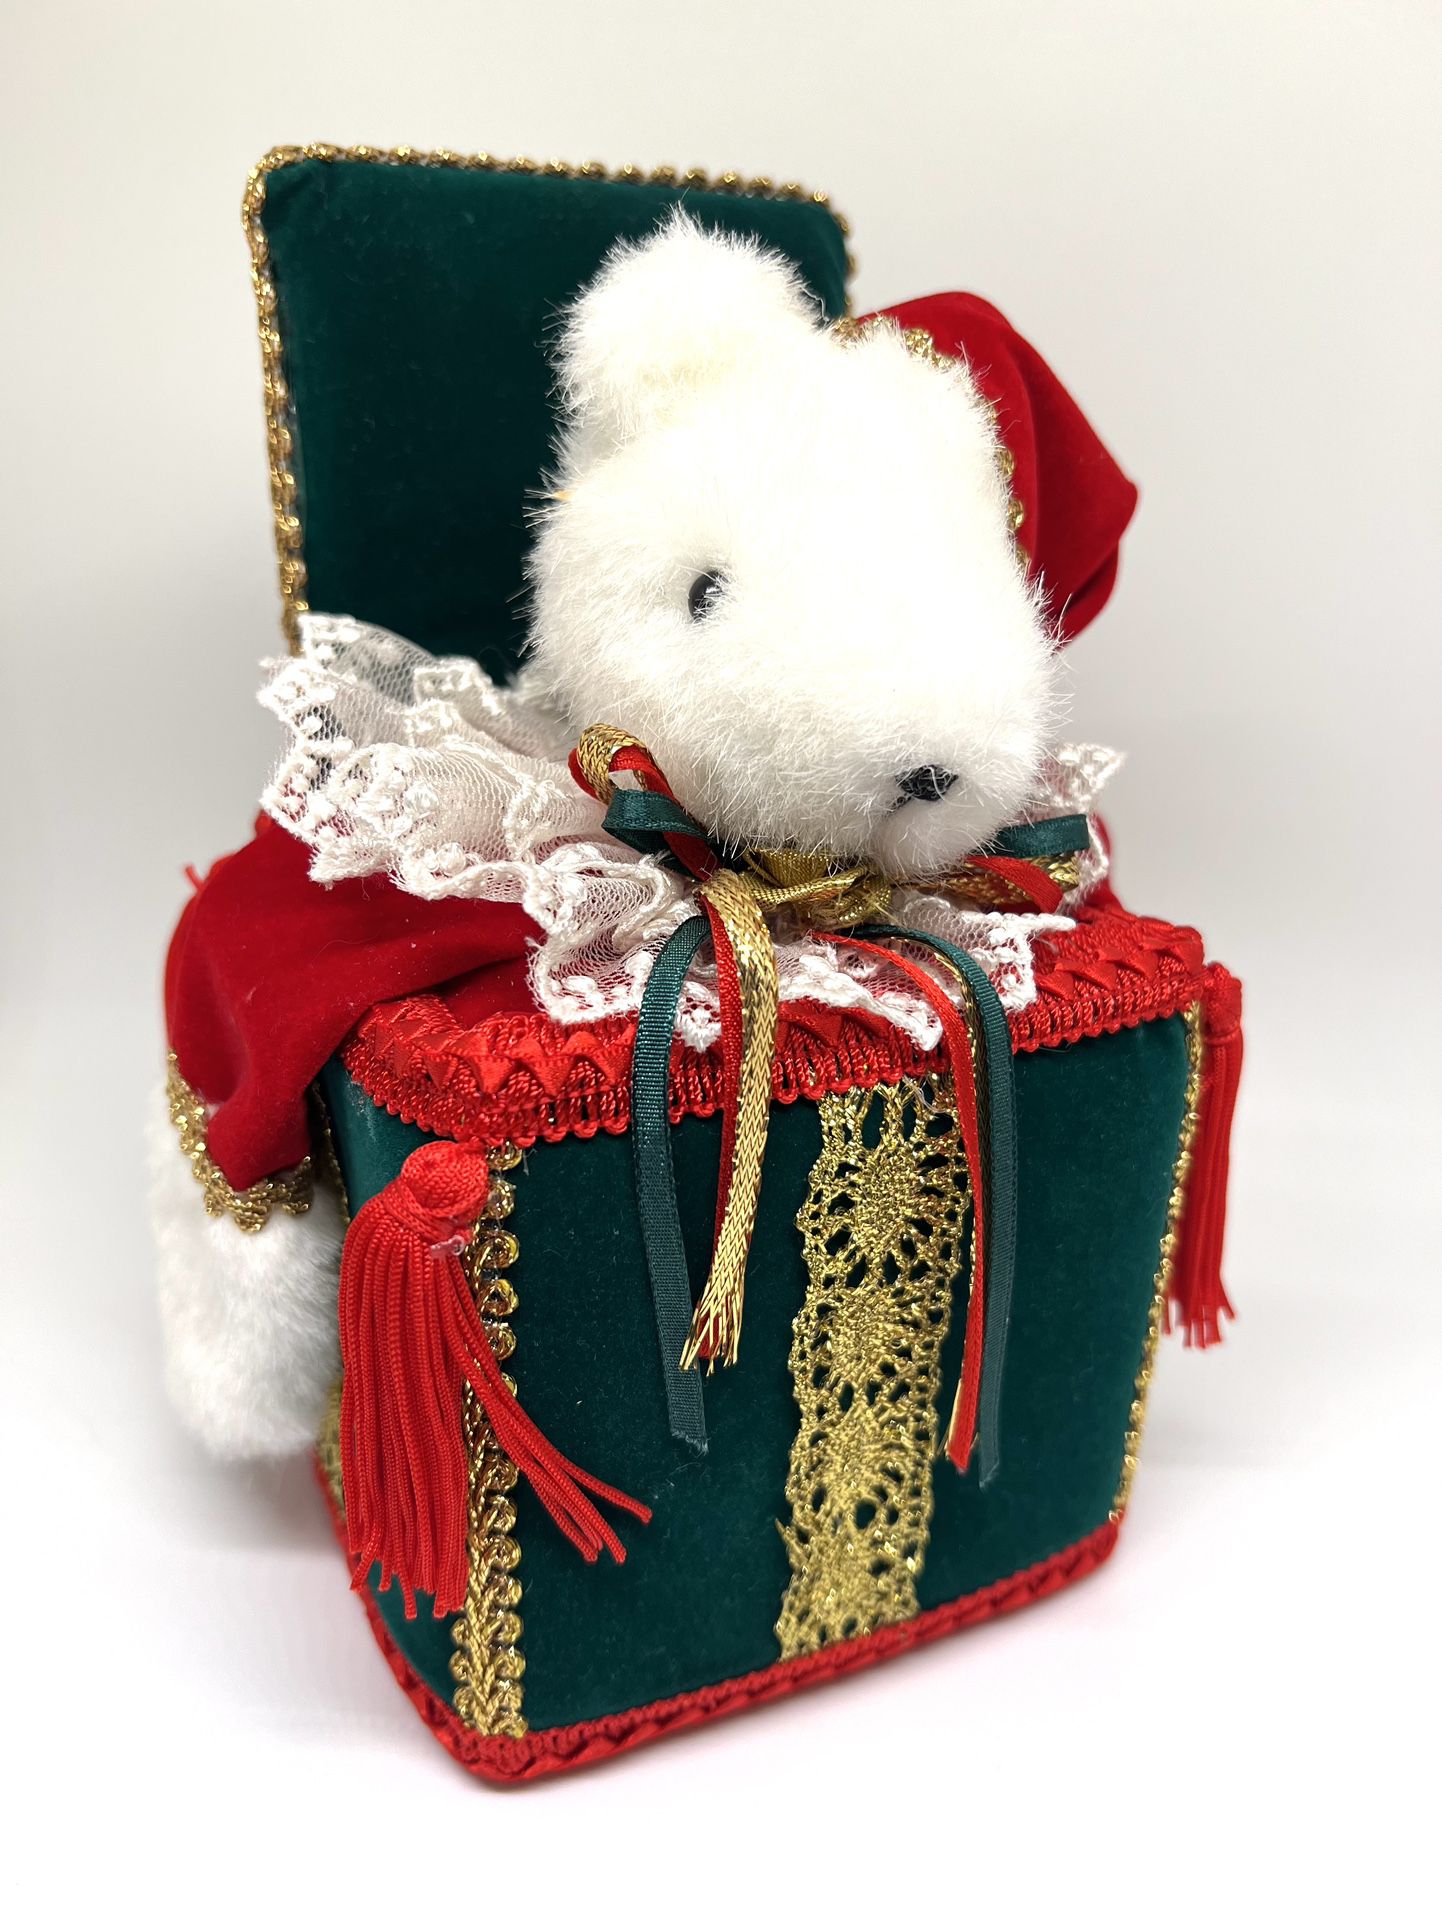 Vintage /Victorian style/Christmas Teddy Bear Music Box/head moved while playing "White Christmas"